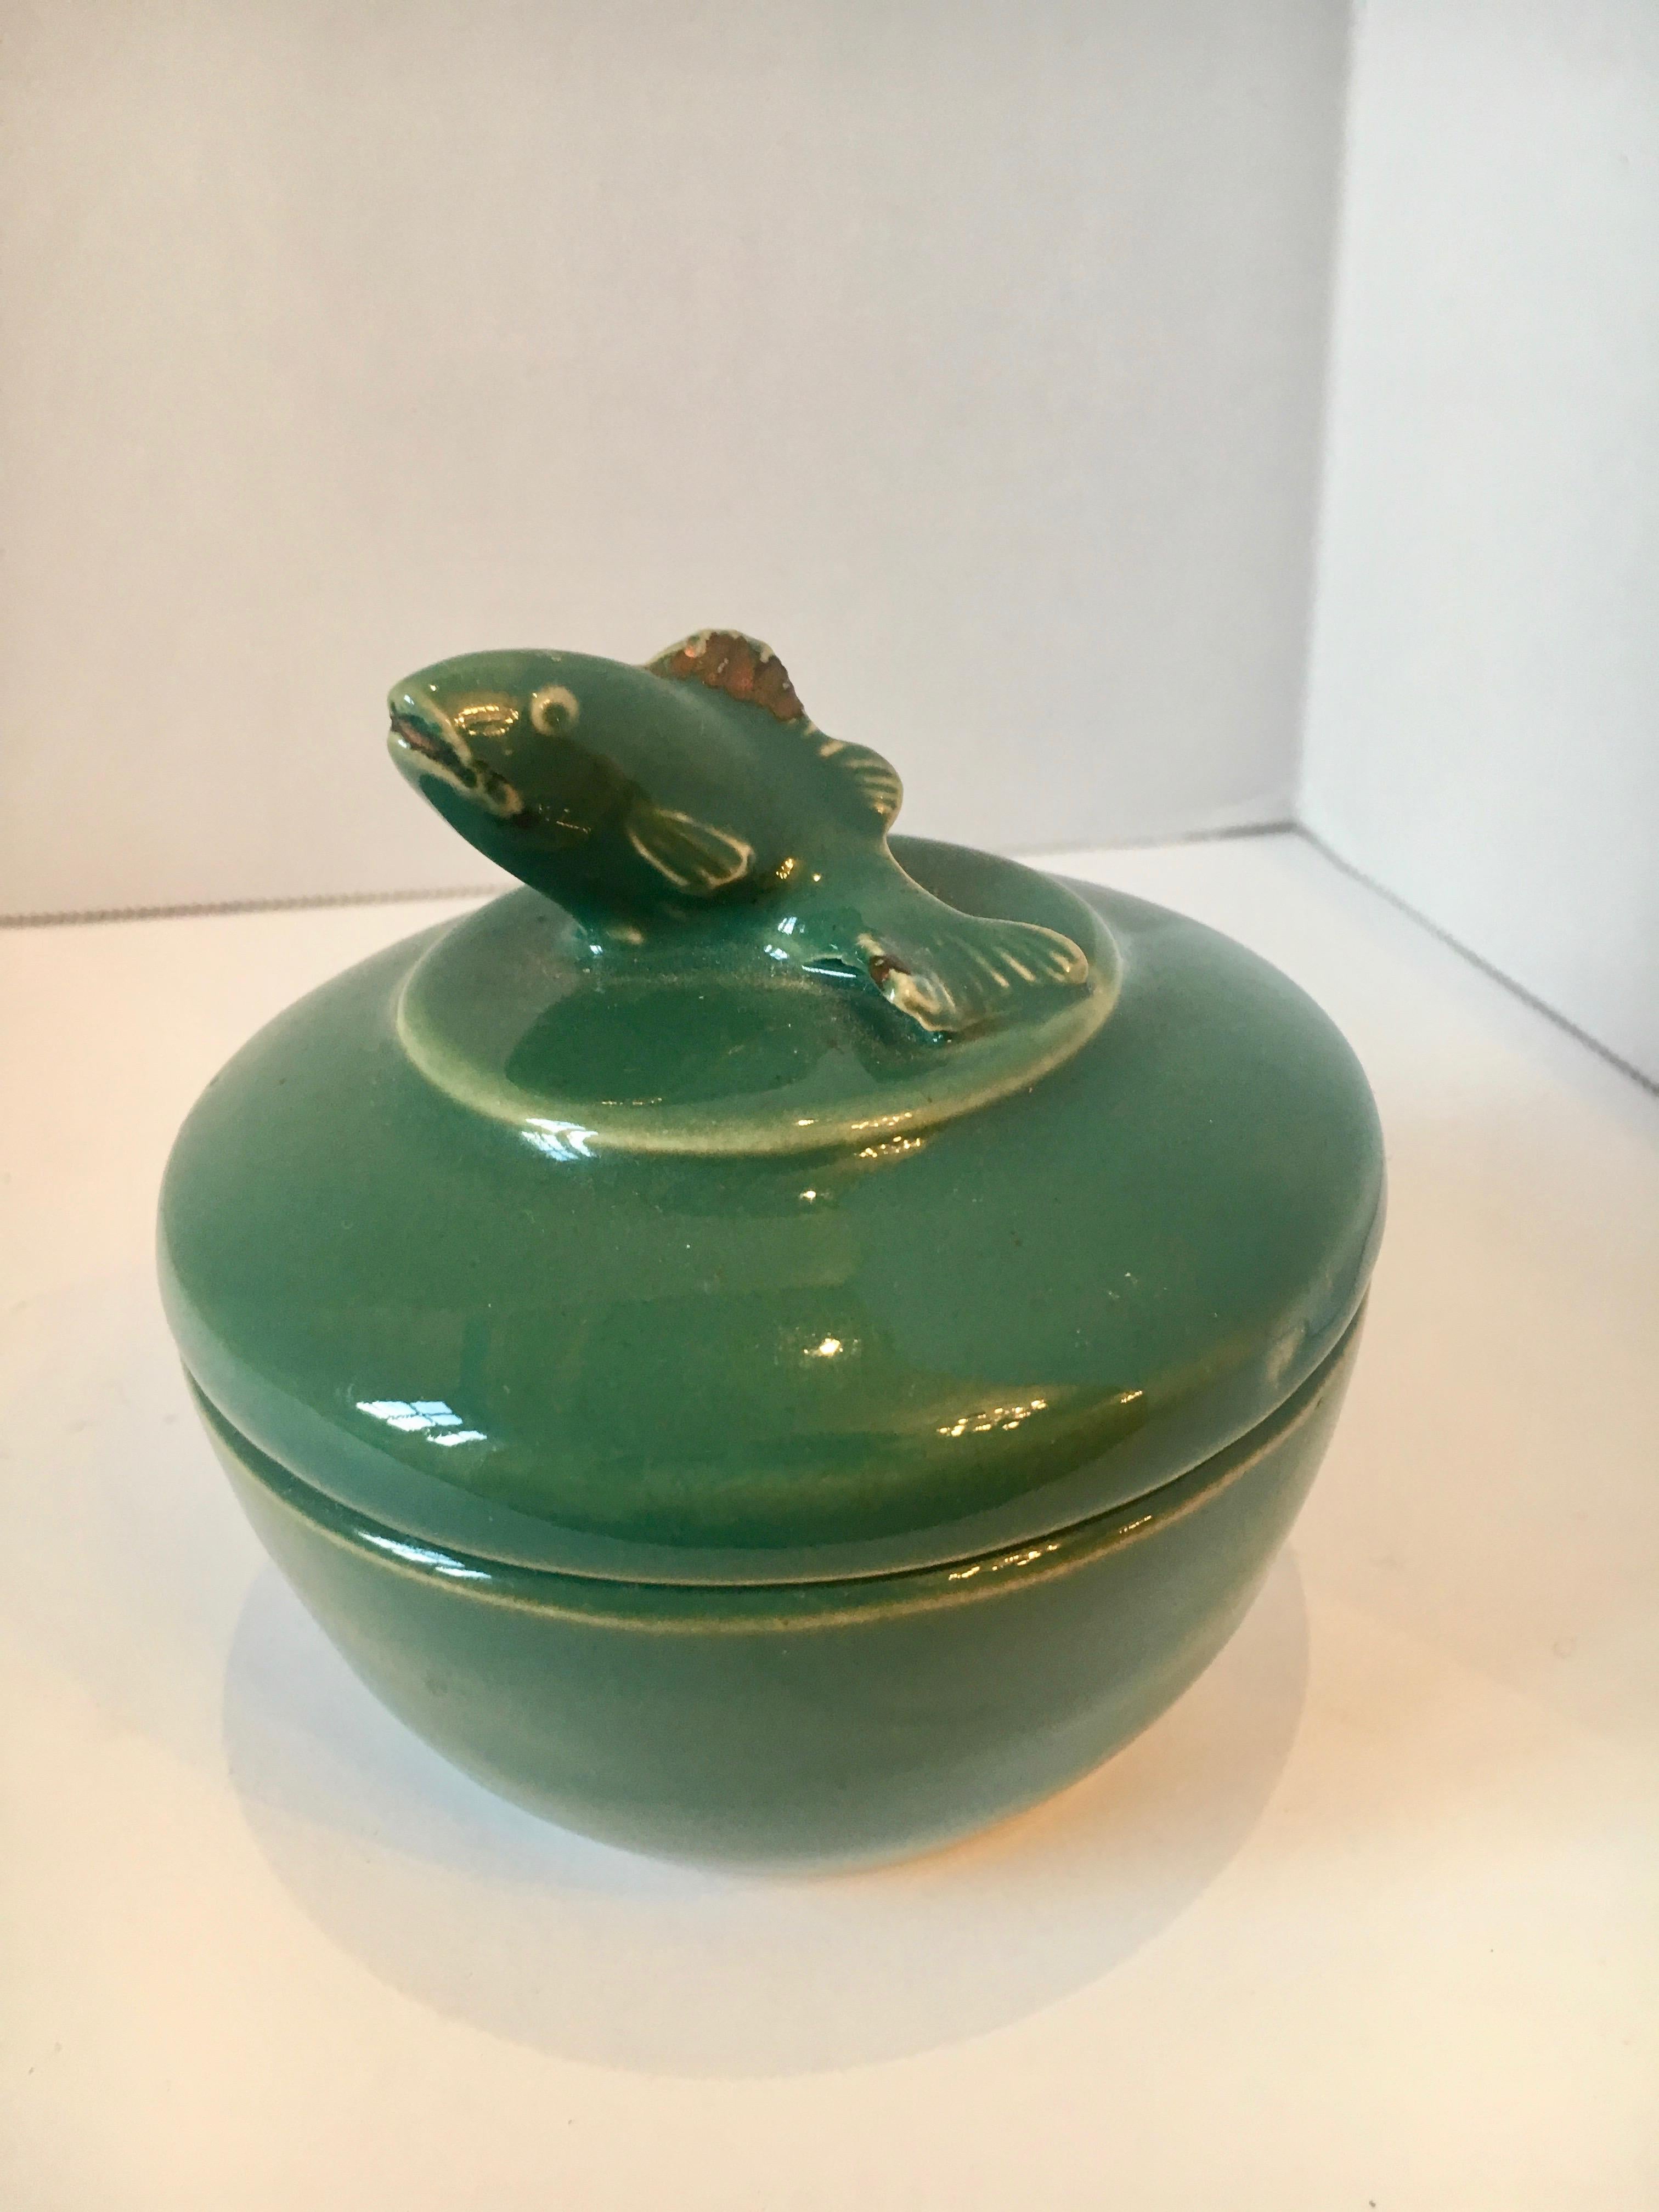 Green ceramic trinket box with fish motif lid - a perfect spot for small jewels, mens clips and change. A great gift for dad or the office. and perfect for the dressing table or vanity.